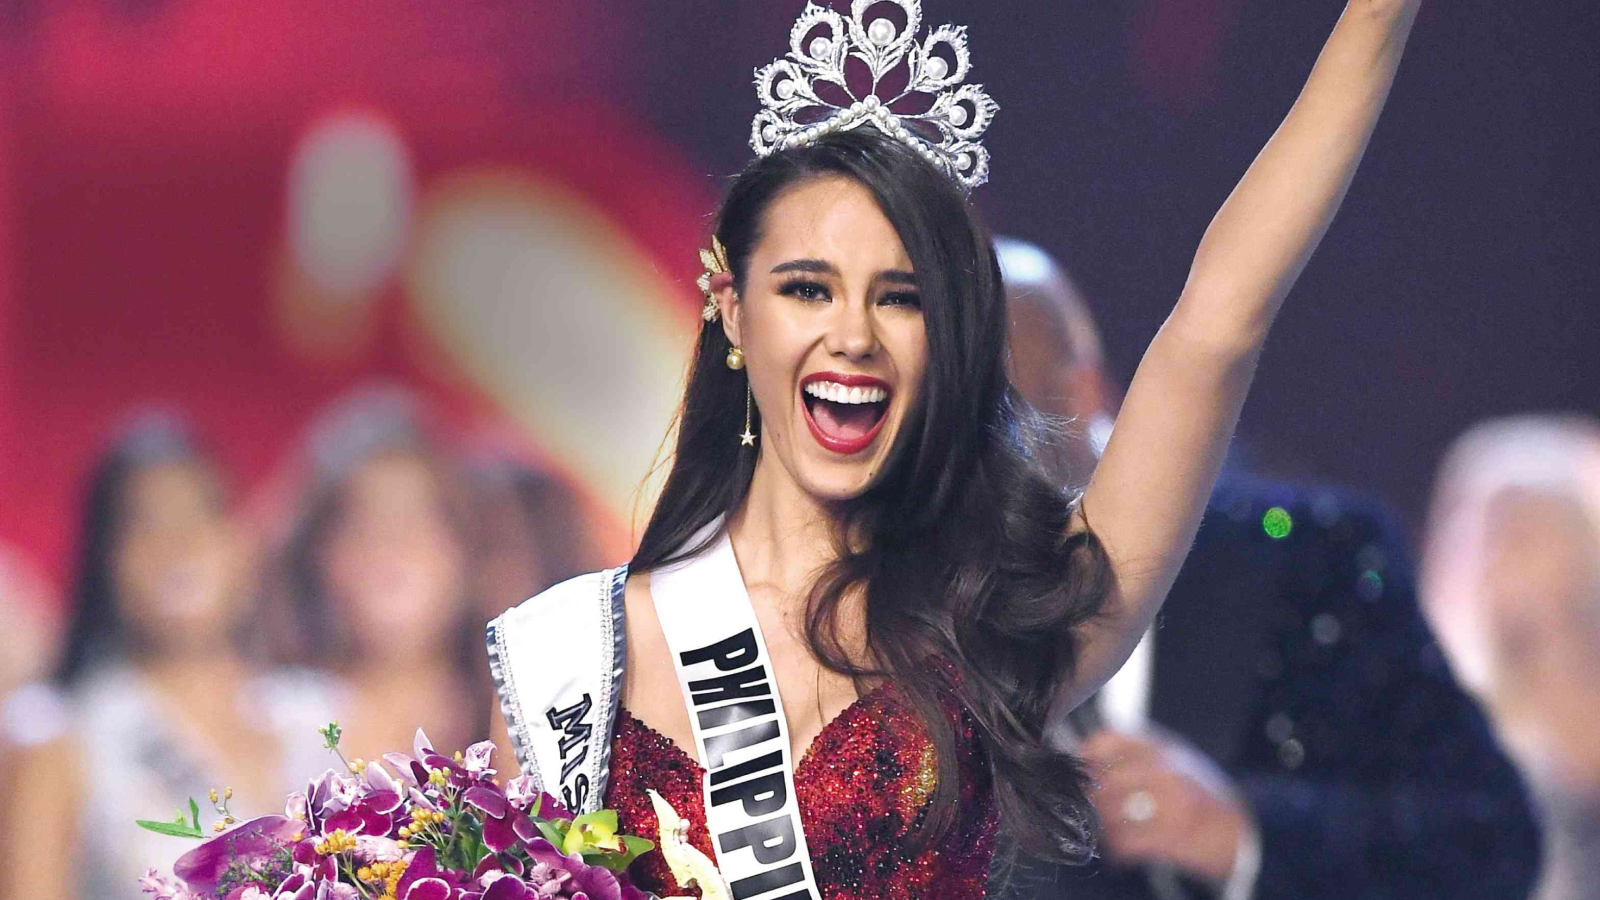 muvn-ck-catriona-gray1-1369-1665904265281-16659042654051036370799.png